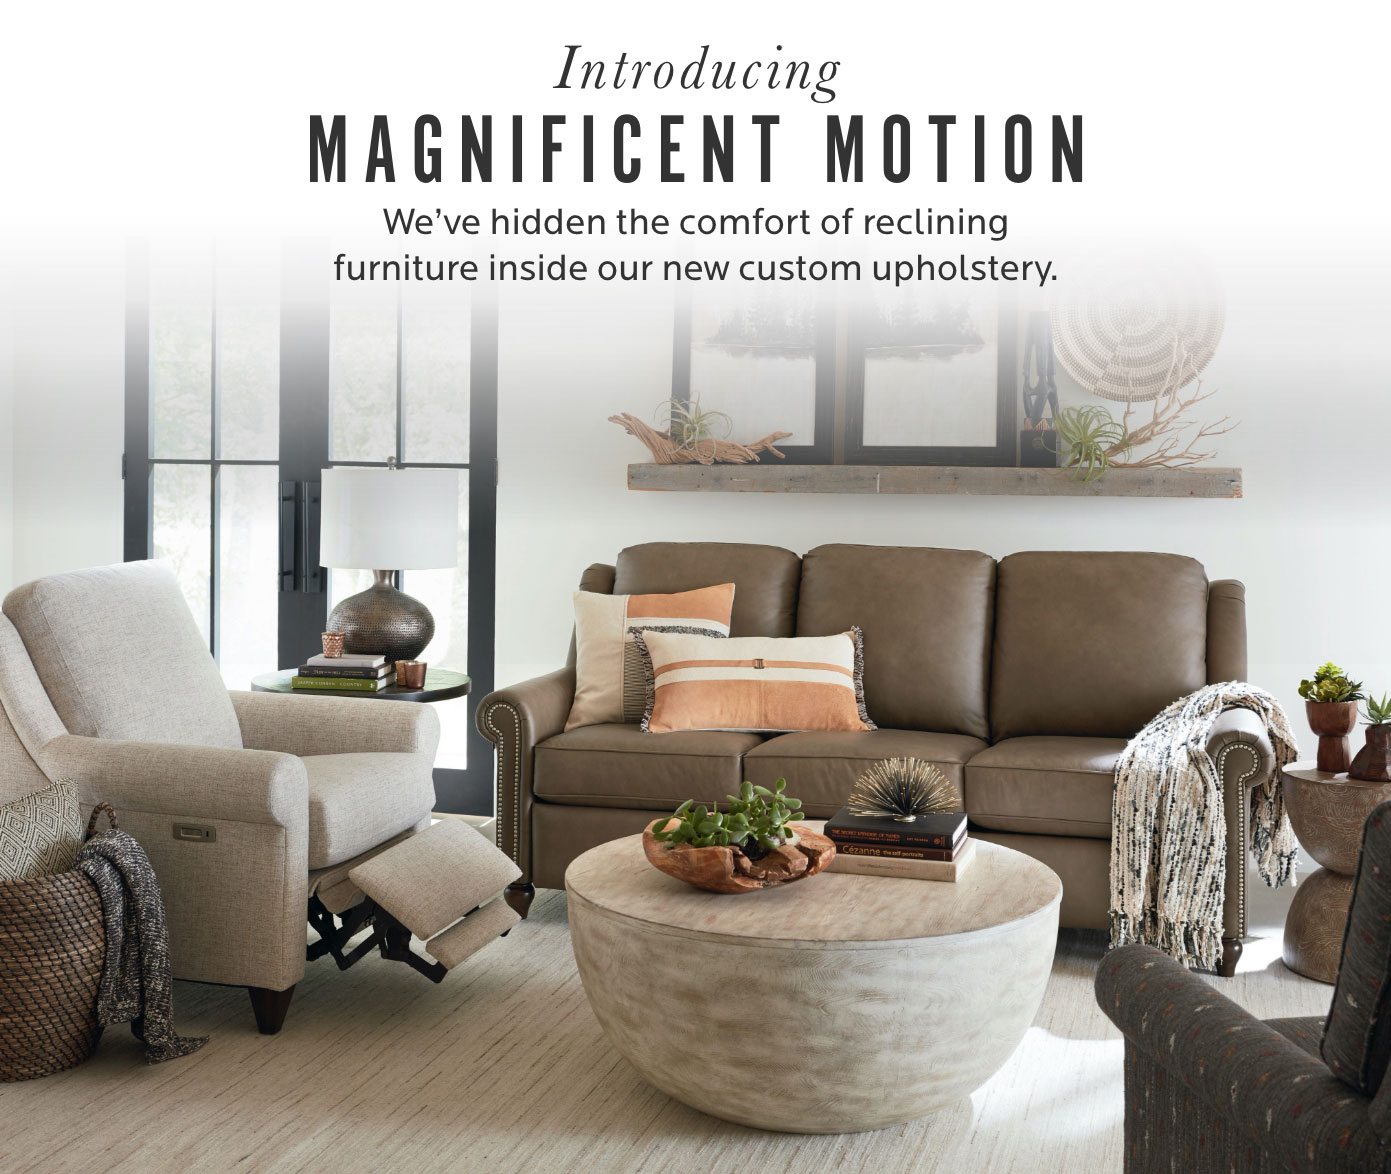 Introducing Magnificent Motion. We've hidden the comfort of reclining furniture inside our new custom upholstery.